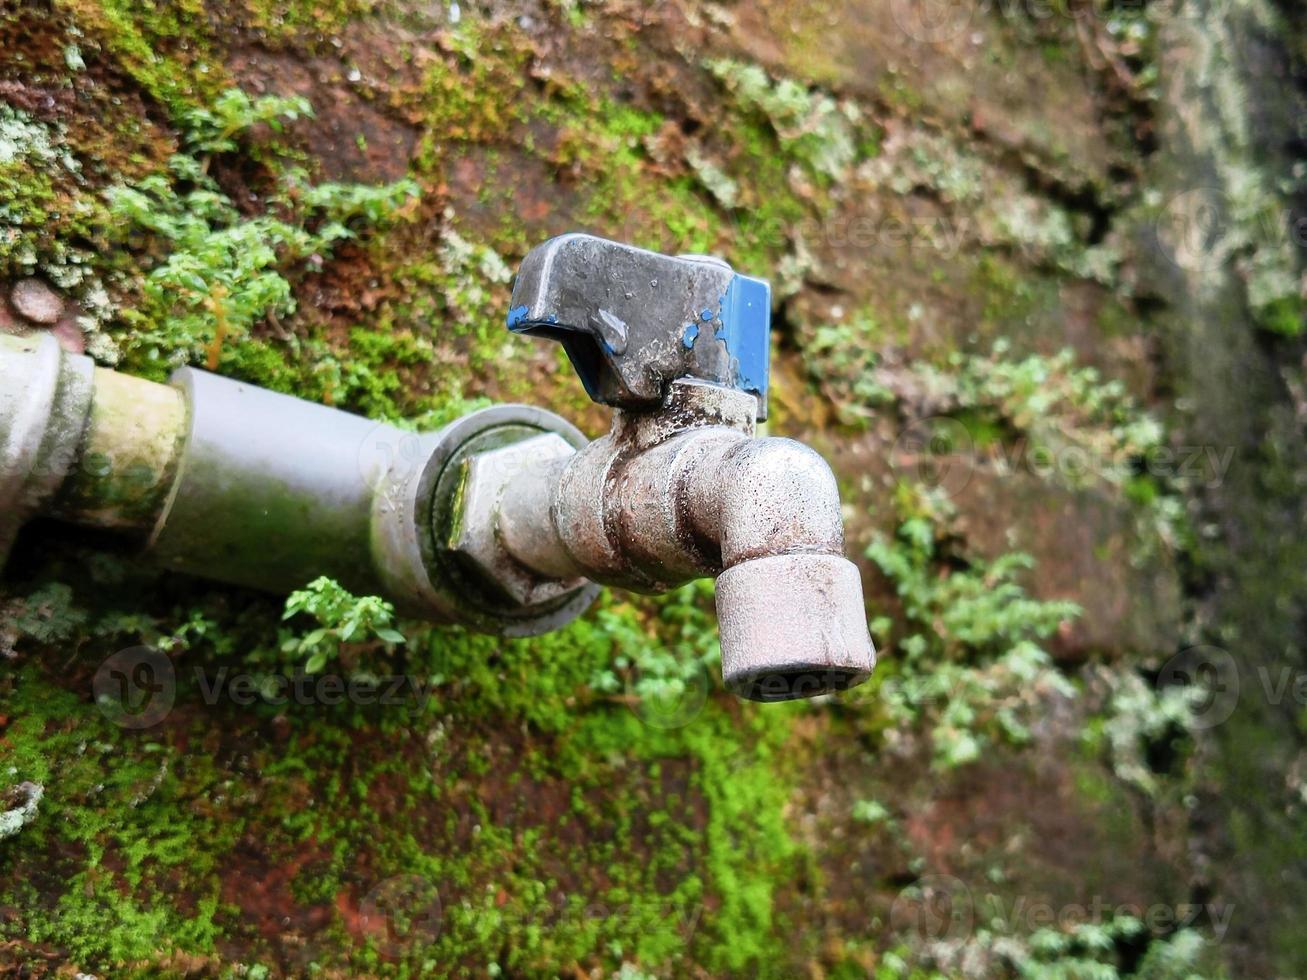 The classic water faucet on the mossy wall photo